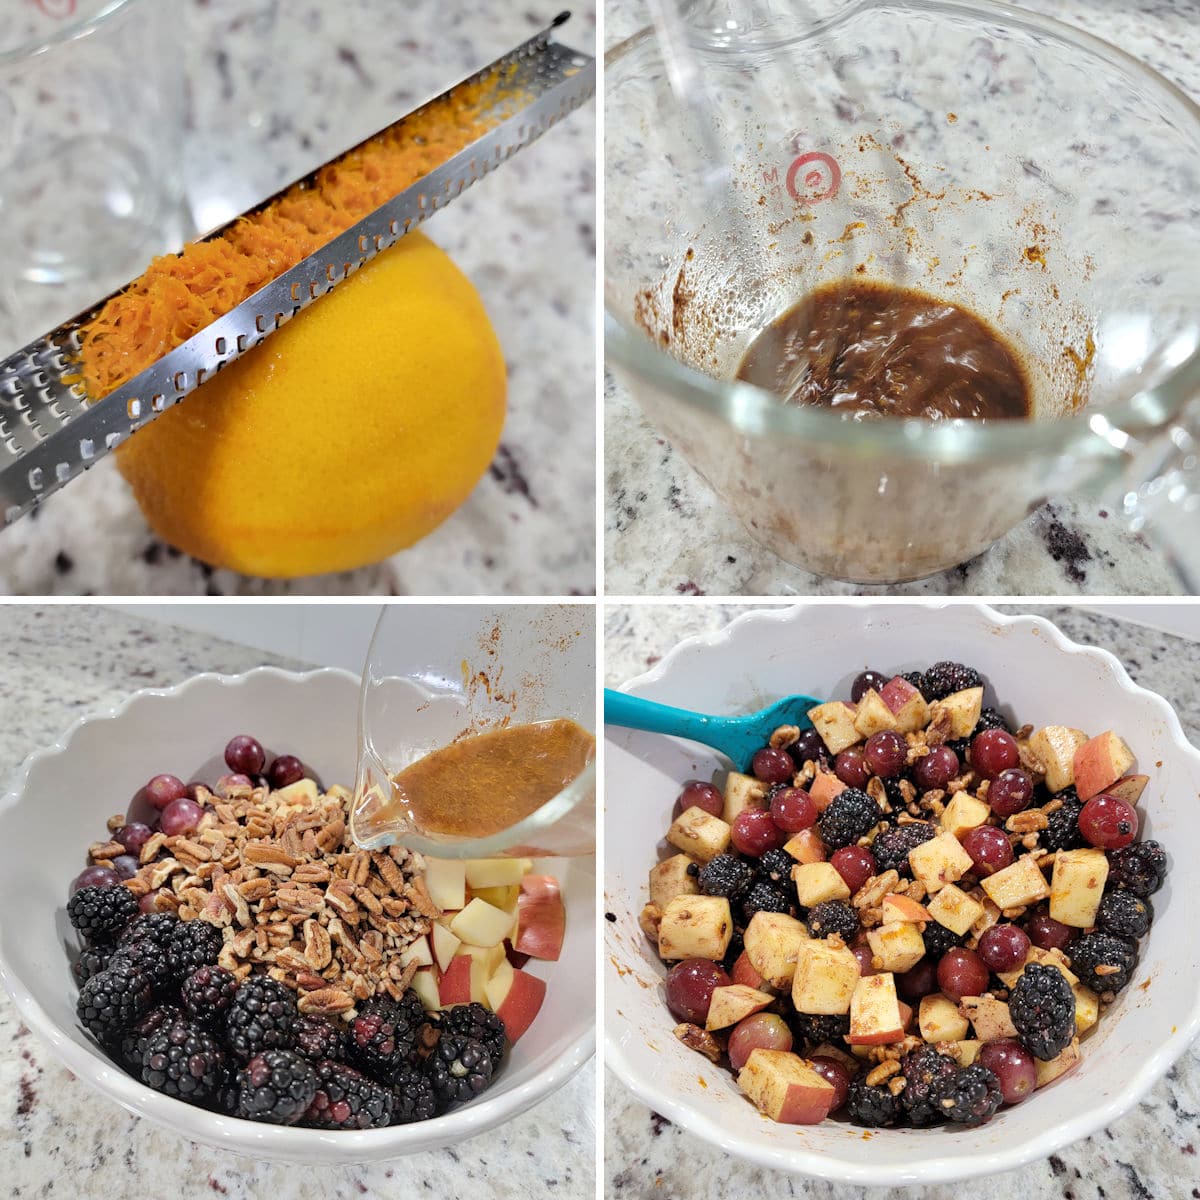 Collage of photos showing assembly of a fruit salad.